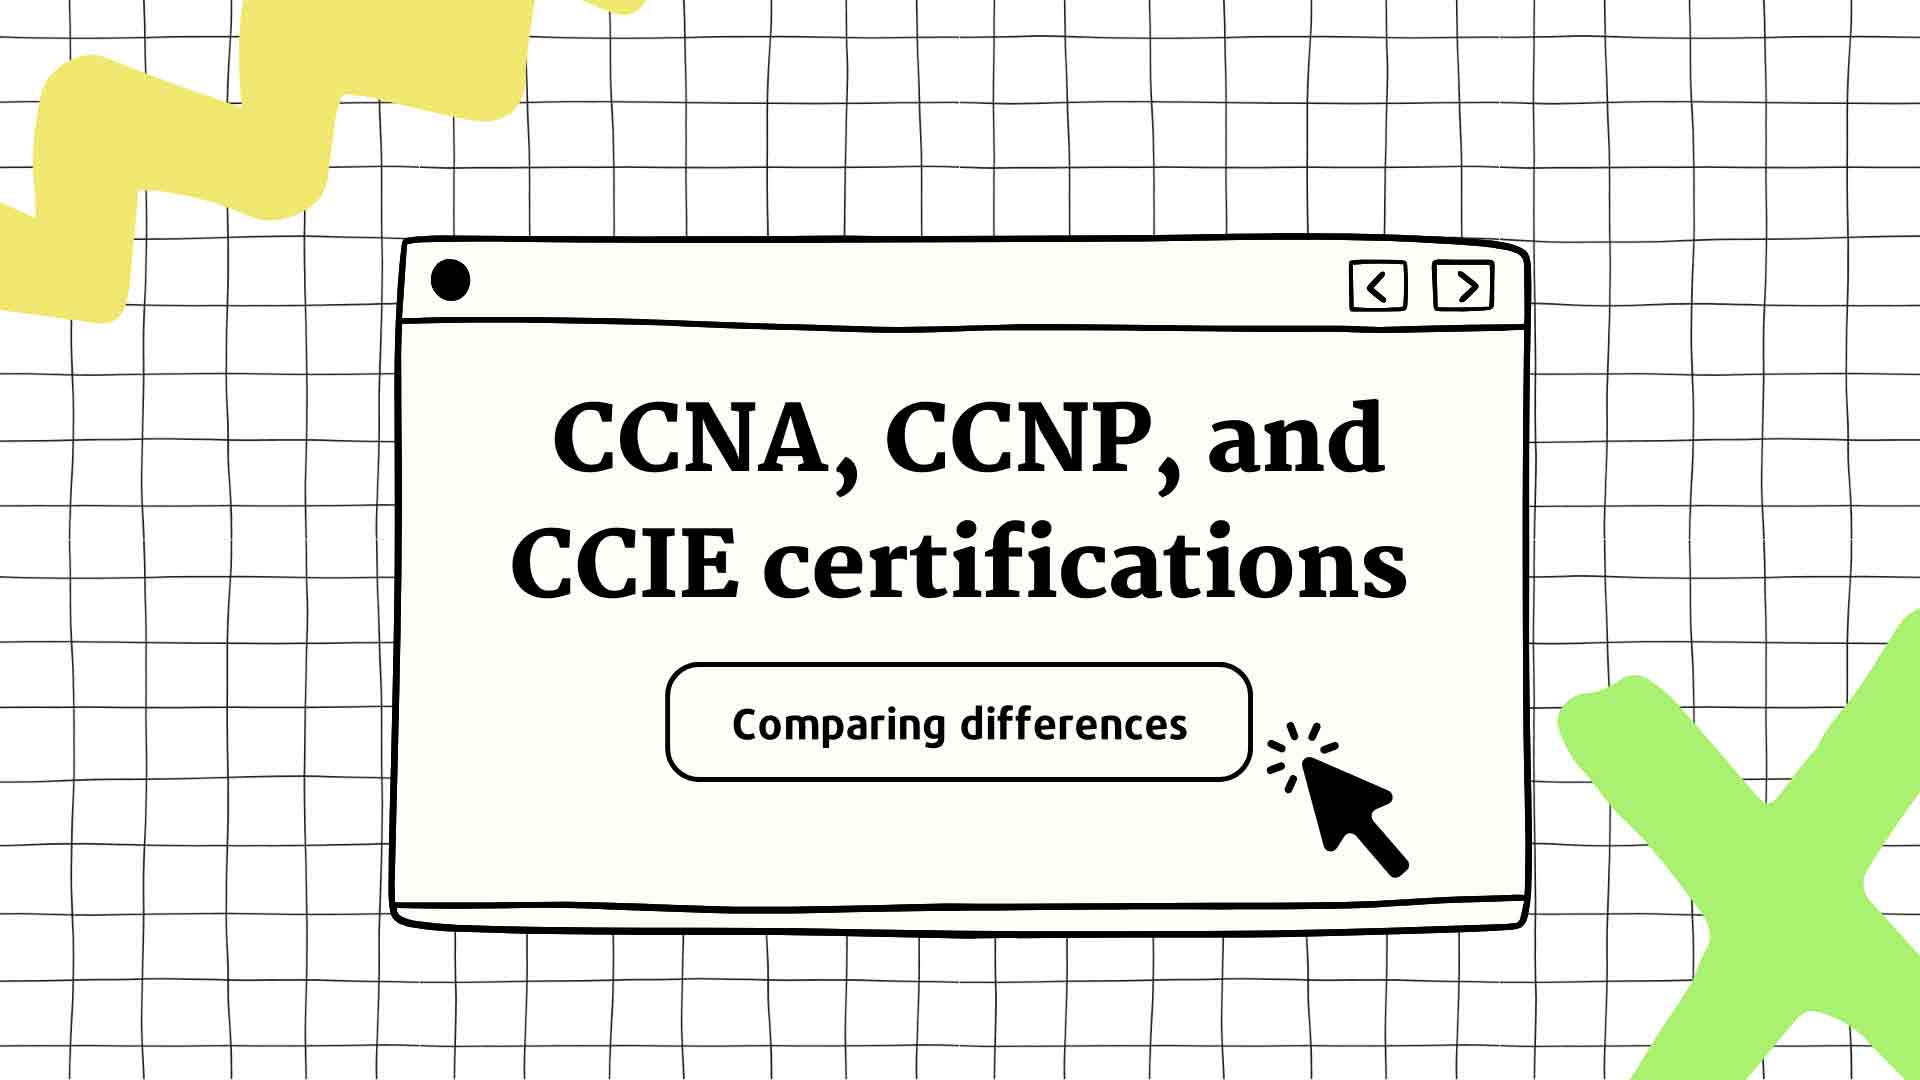 Comparing the differences: CCNA, CCNP, and CCIE certifications